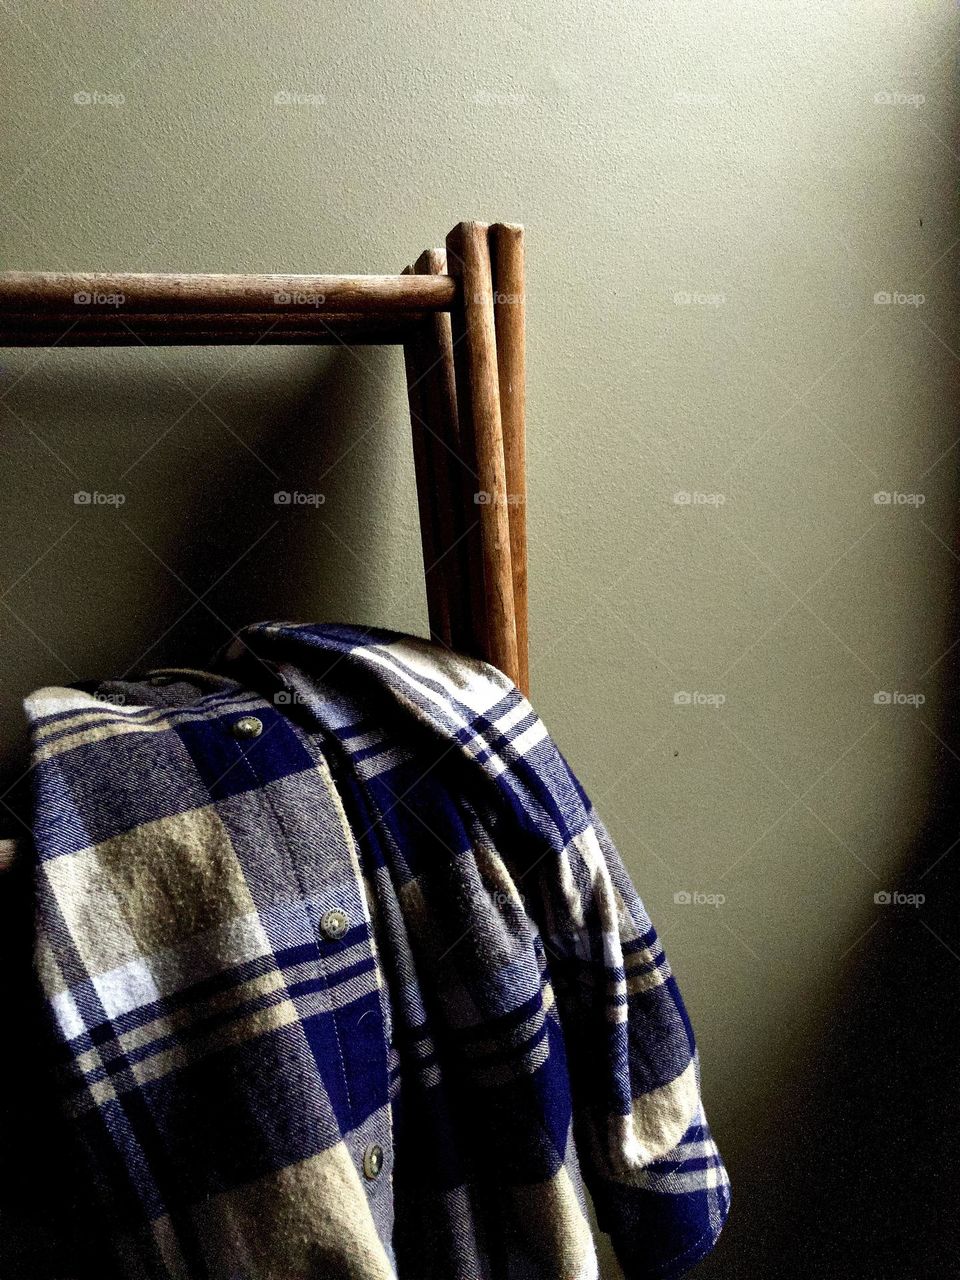 Plaid flannel shirt folded on wooden clothes rack in partial shadow, against a gray interior wall.